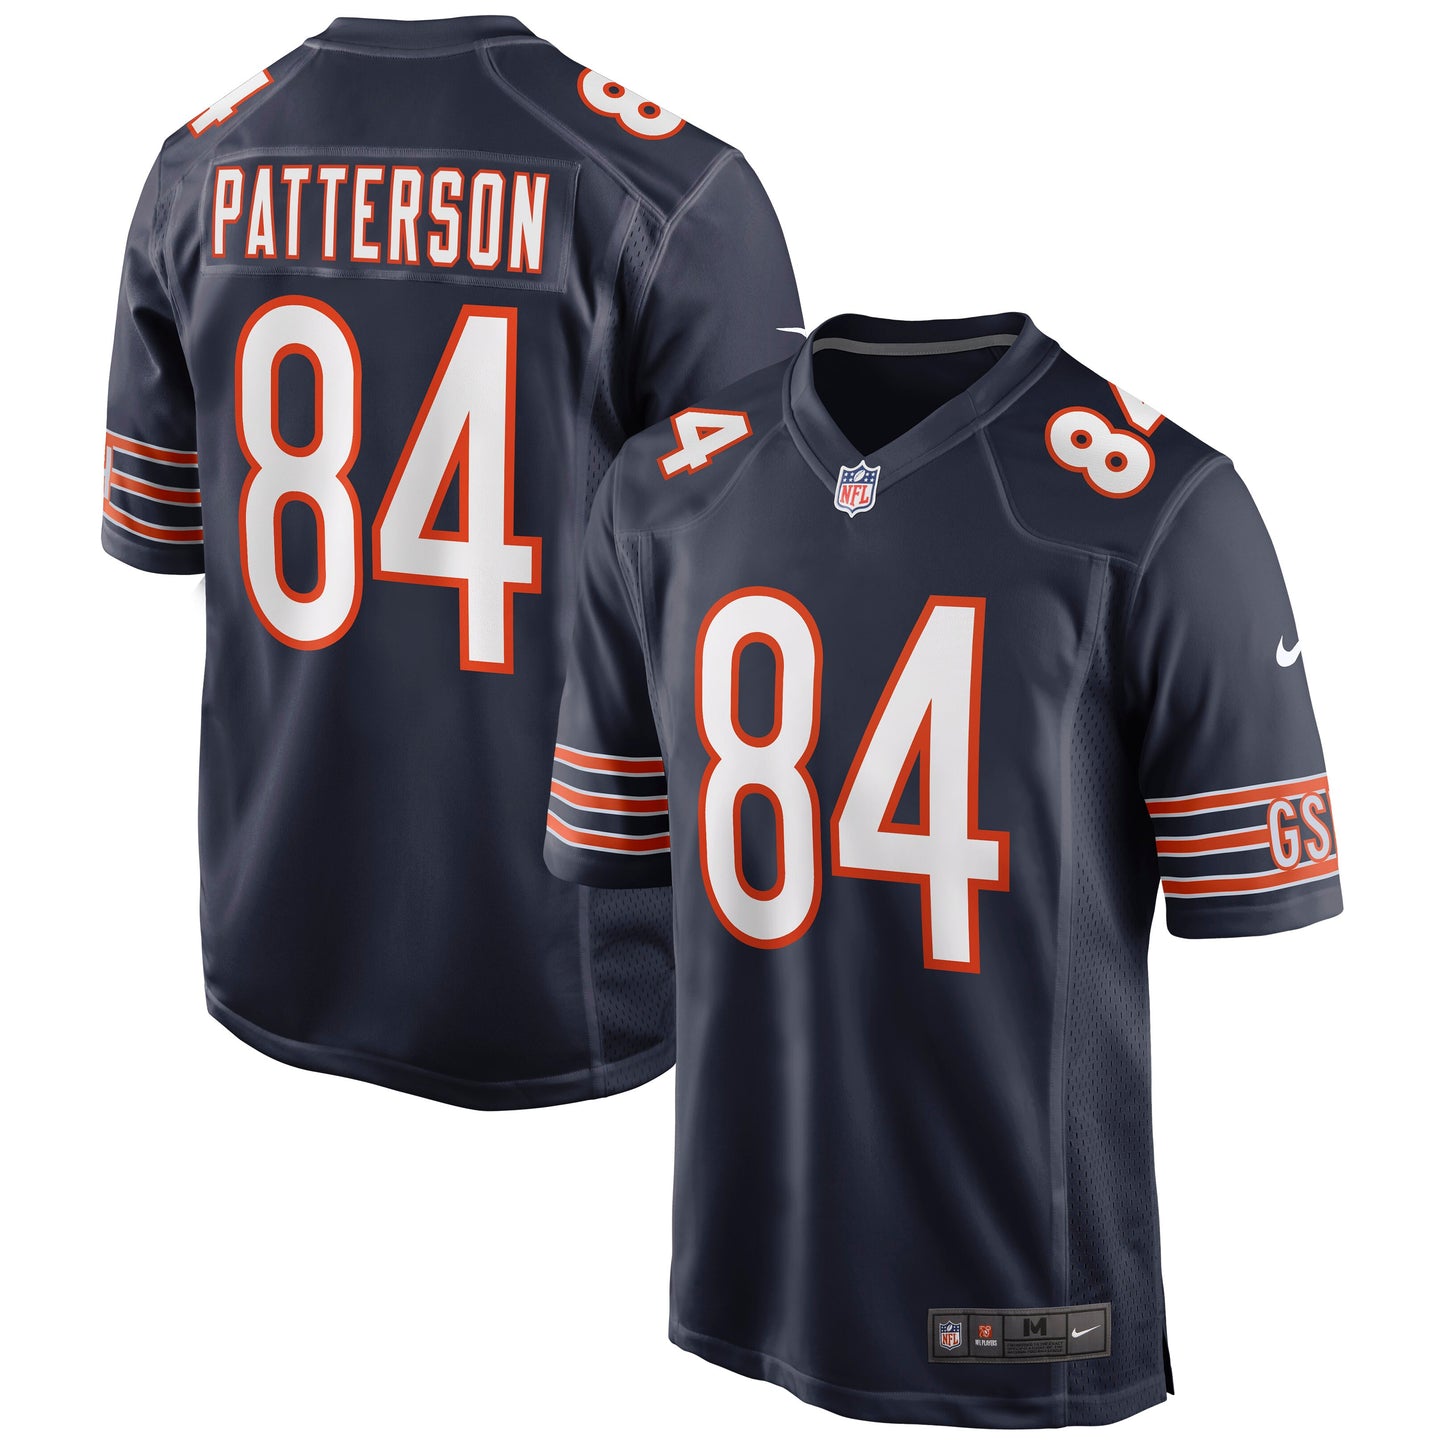 Cordarrelle Patterson Chicago Bears Nike Game Jersey - Navy